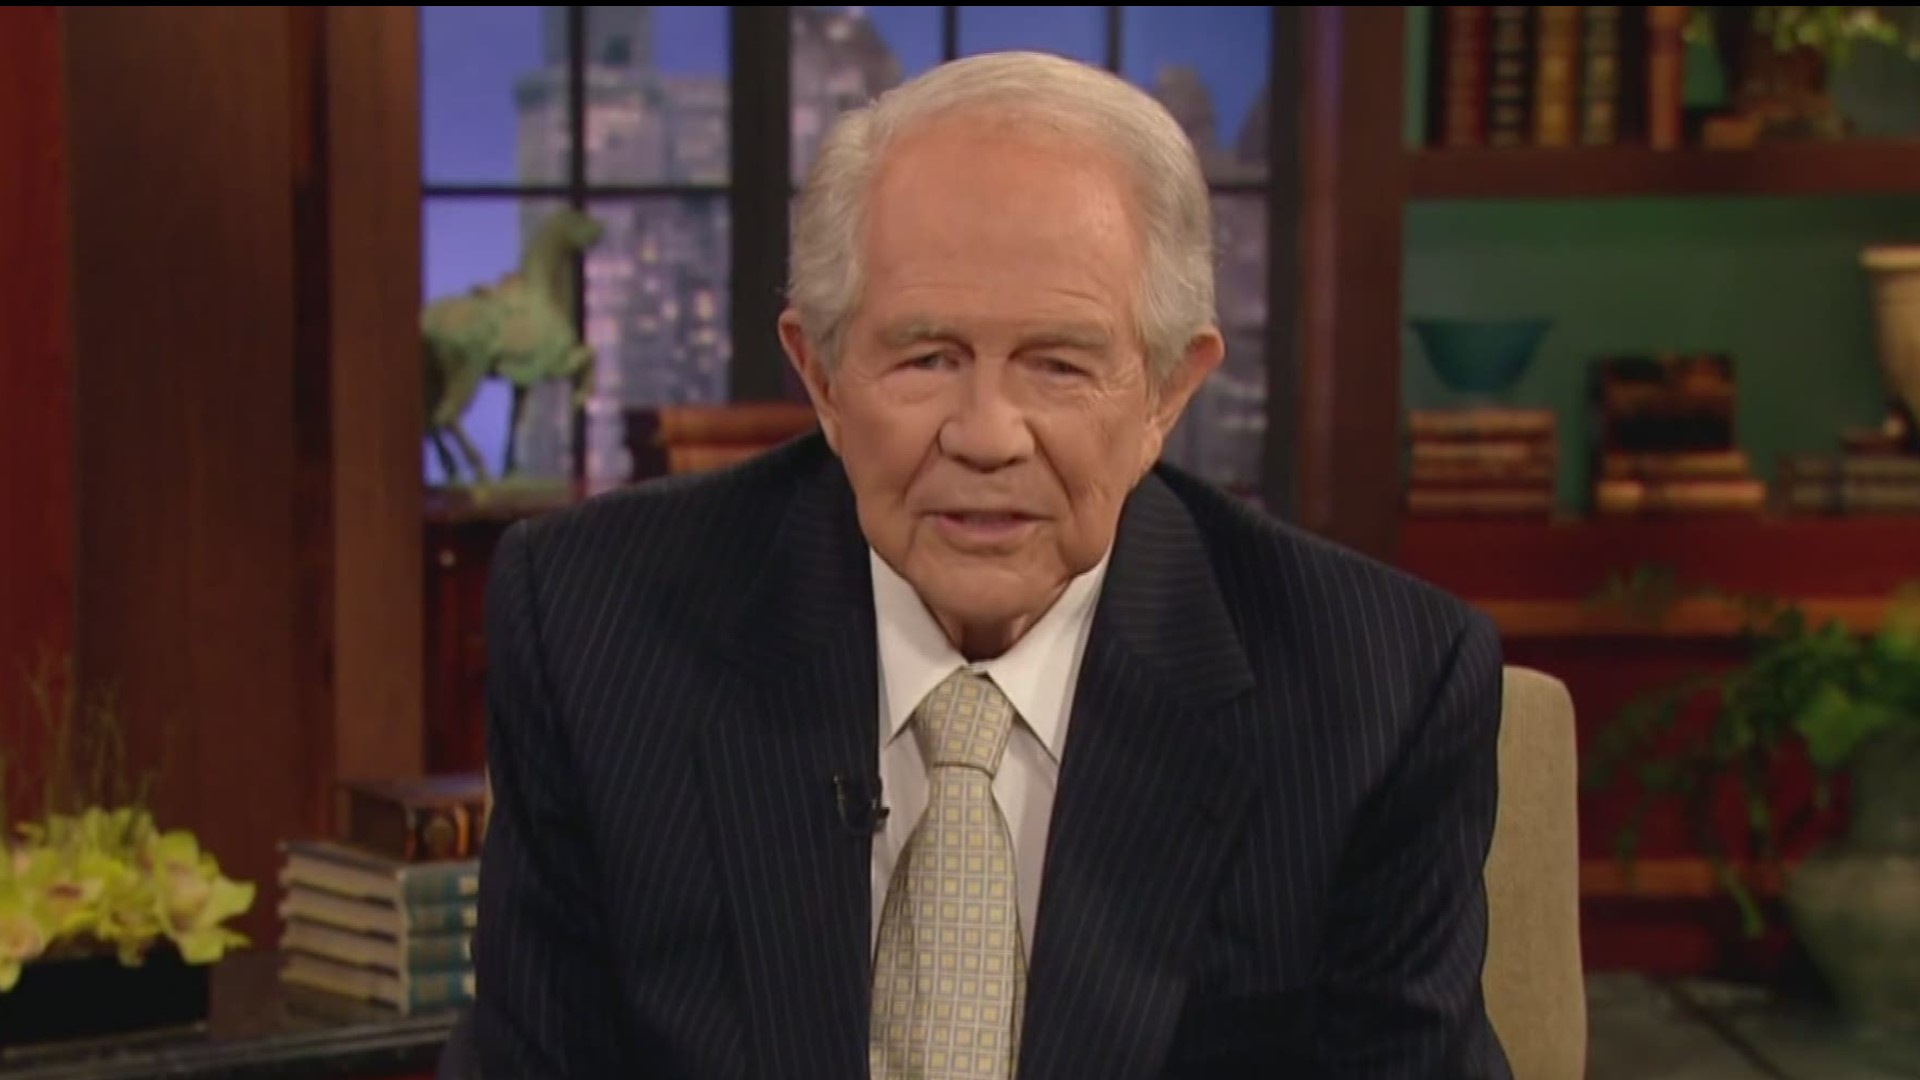 After decades on the job, Pat Robertson is stepping down from his role as a televangelist and host on The 700 Club with Christian Broadcasting Network.